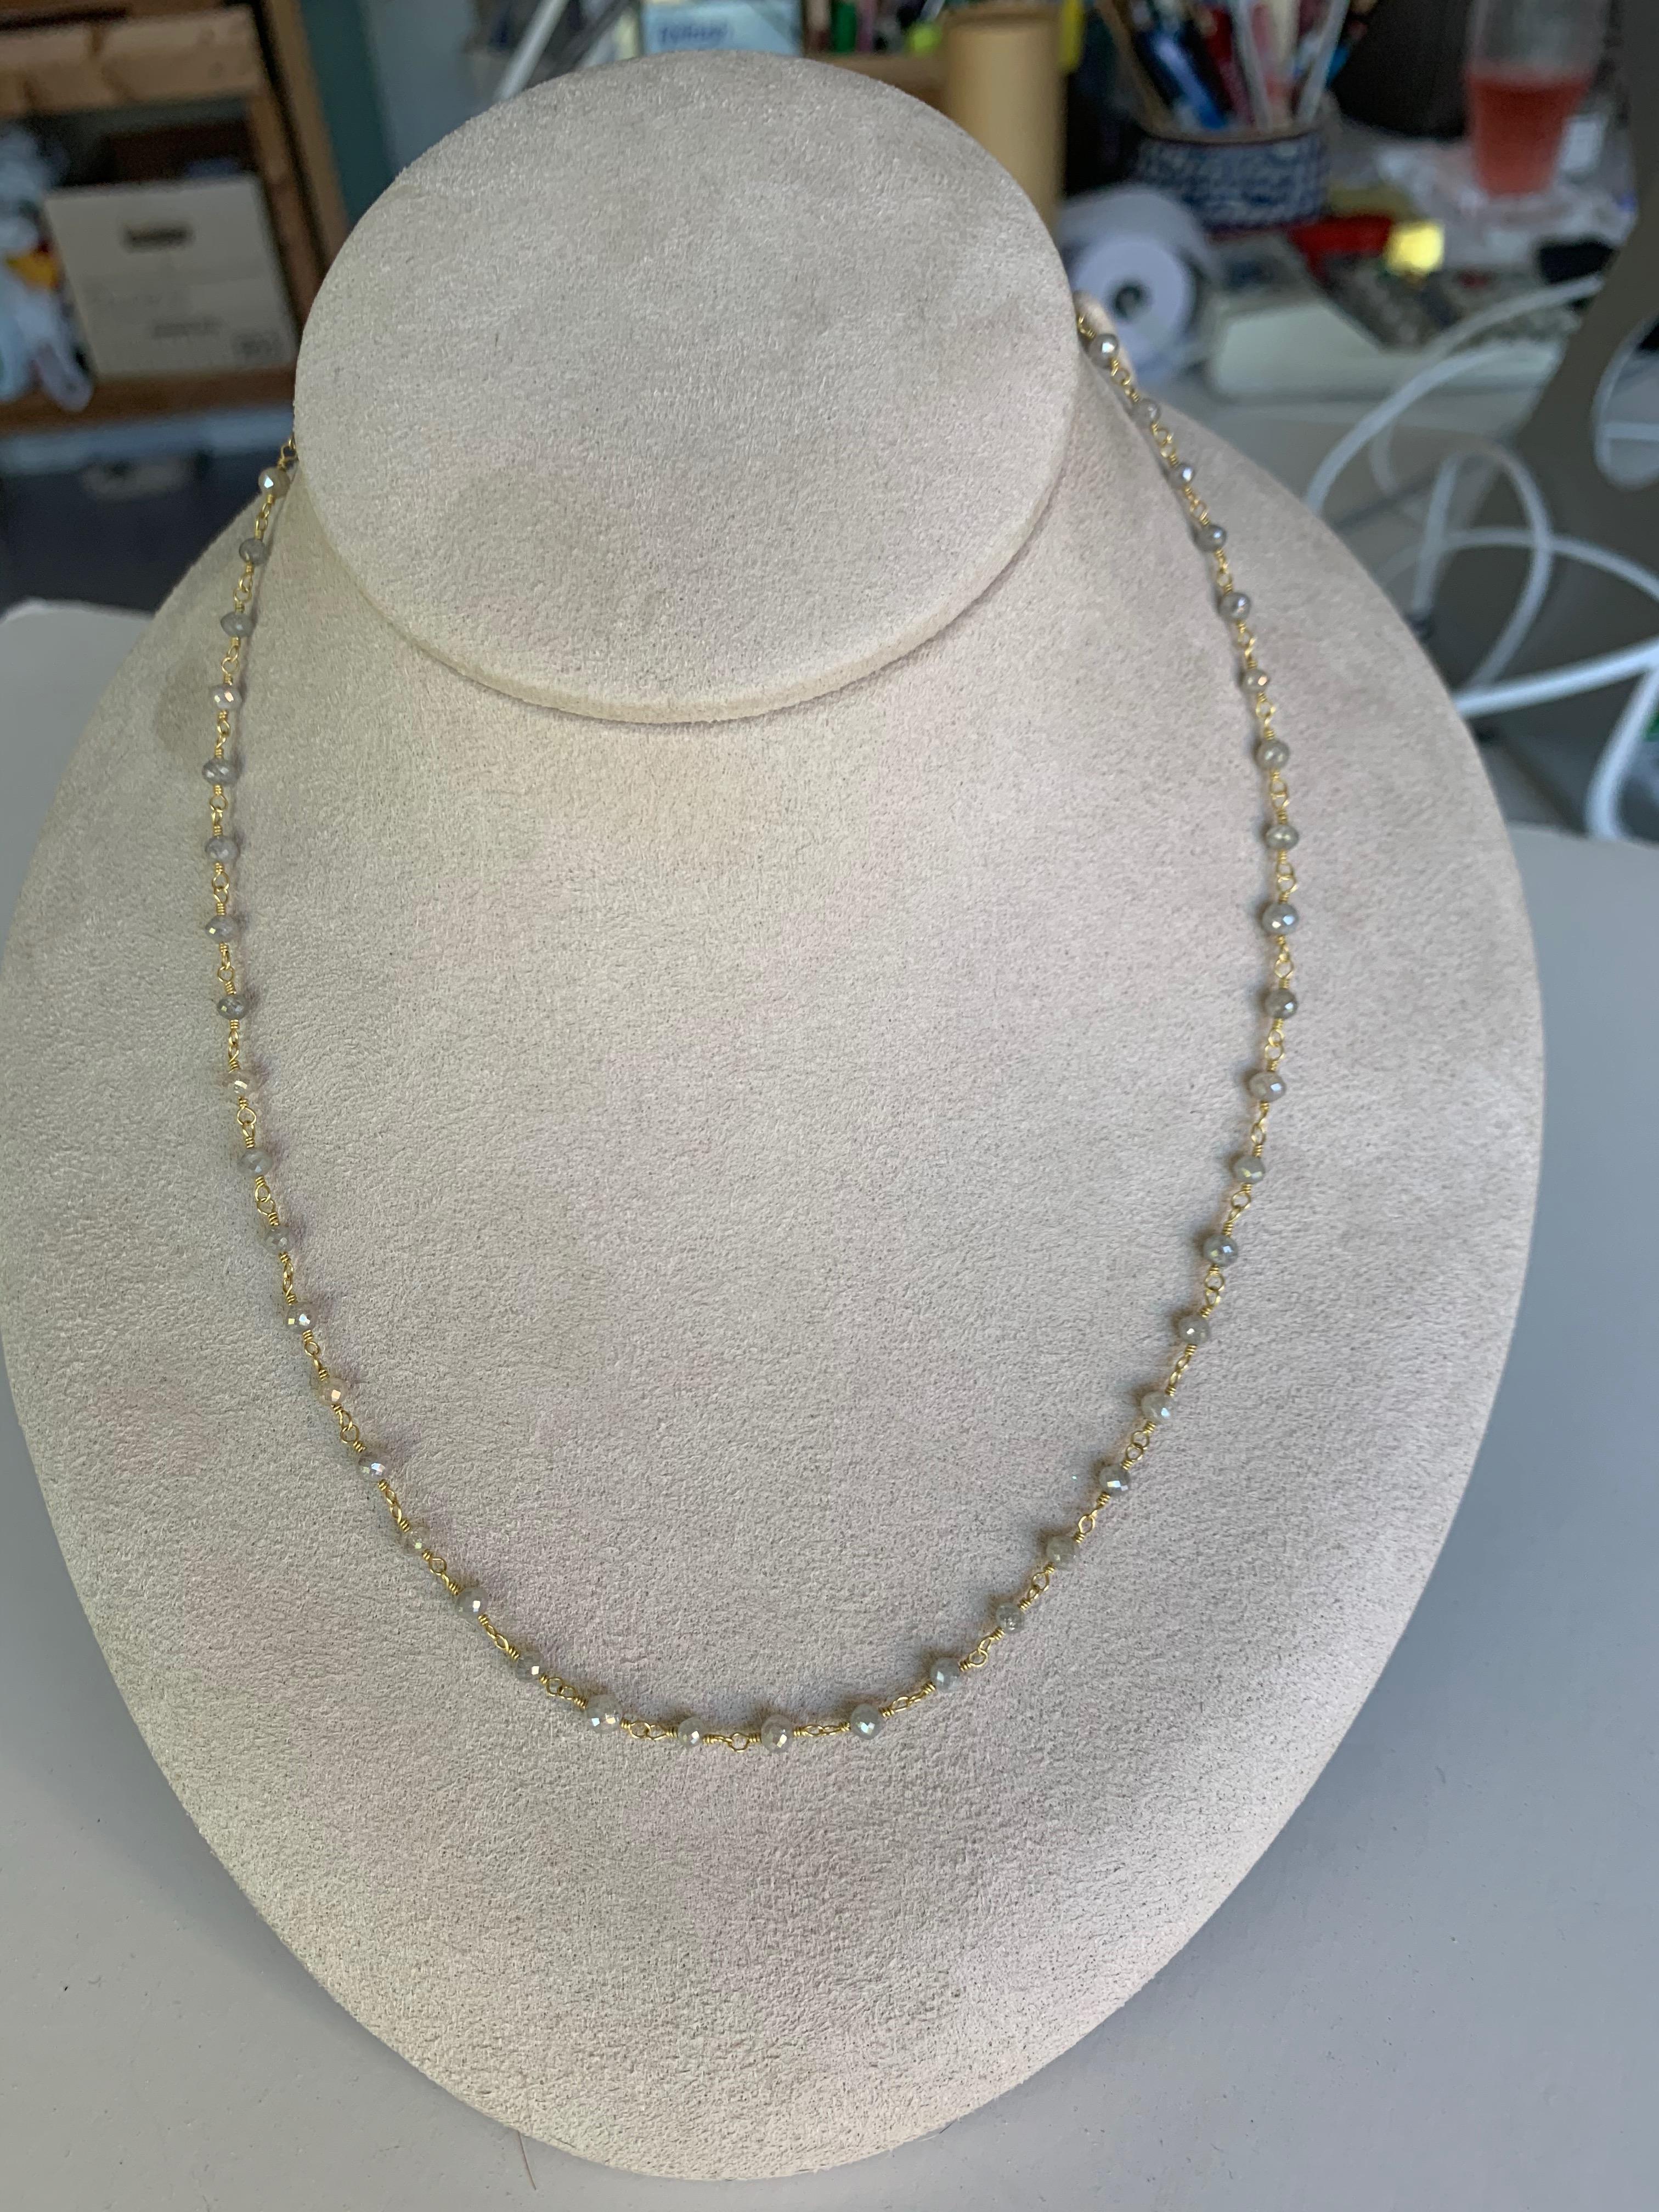 Delicate grey Diamond bead chain in 20 Karat gold, can be worn on it's own or with other chains or necklaces to add  sparkle.
Hand crafted by the artist in her Nww York studio